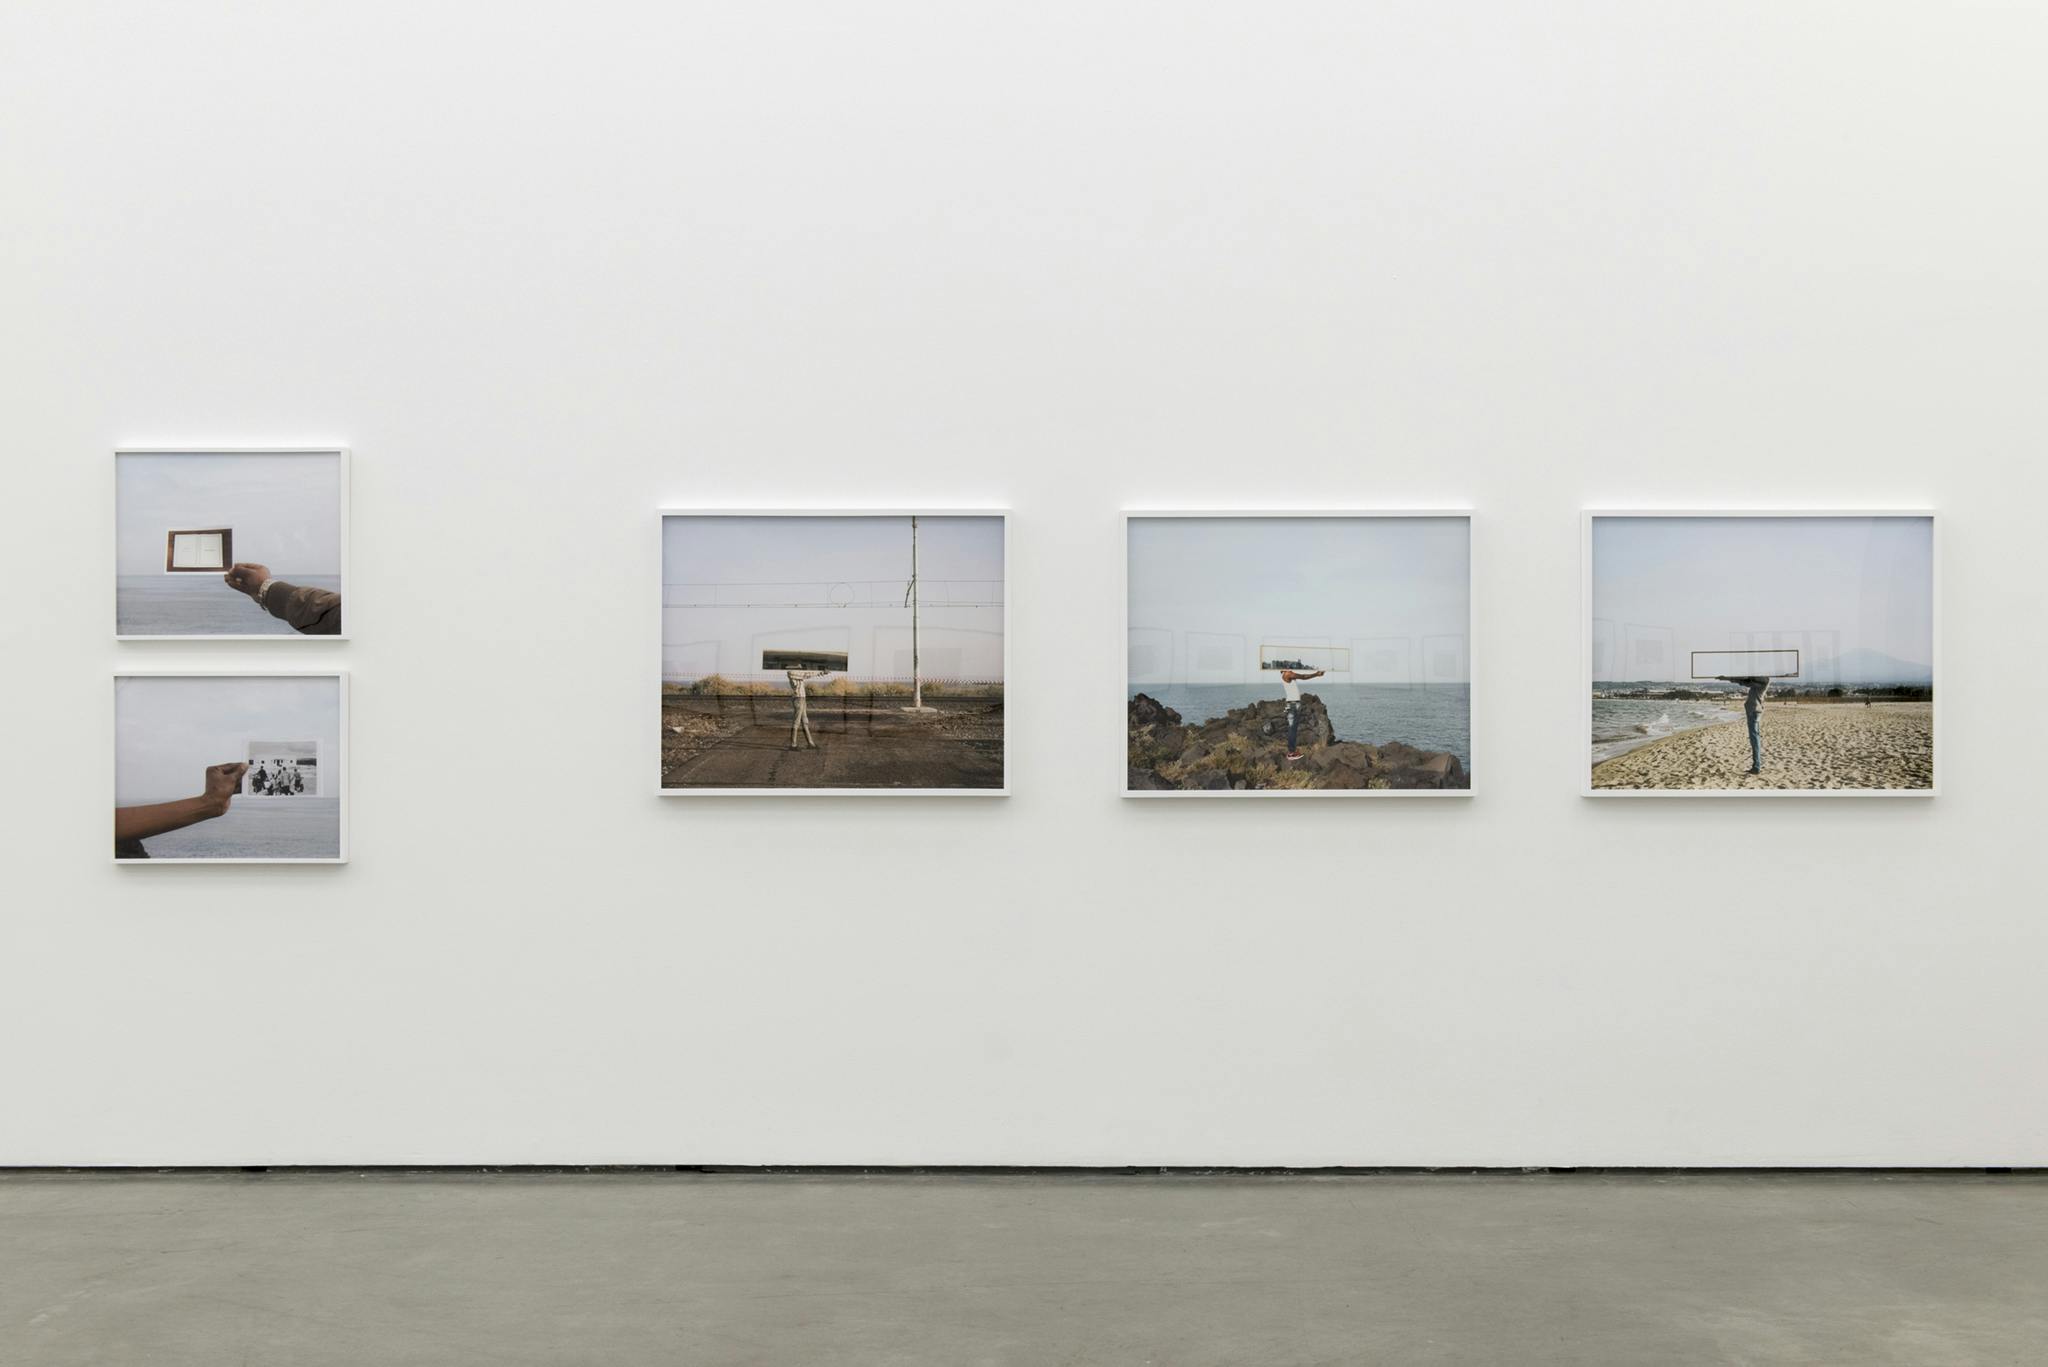 Five framed photographs hang on the gallery wall. Three are of a person holding a mirror in front of their head, outdoors. Two photographs are of a hand holding another photo in front of the ocean. 